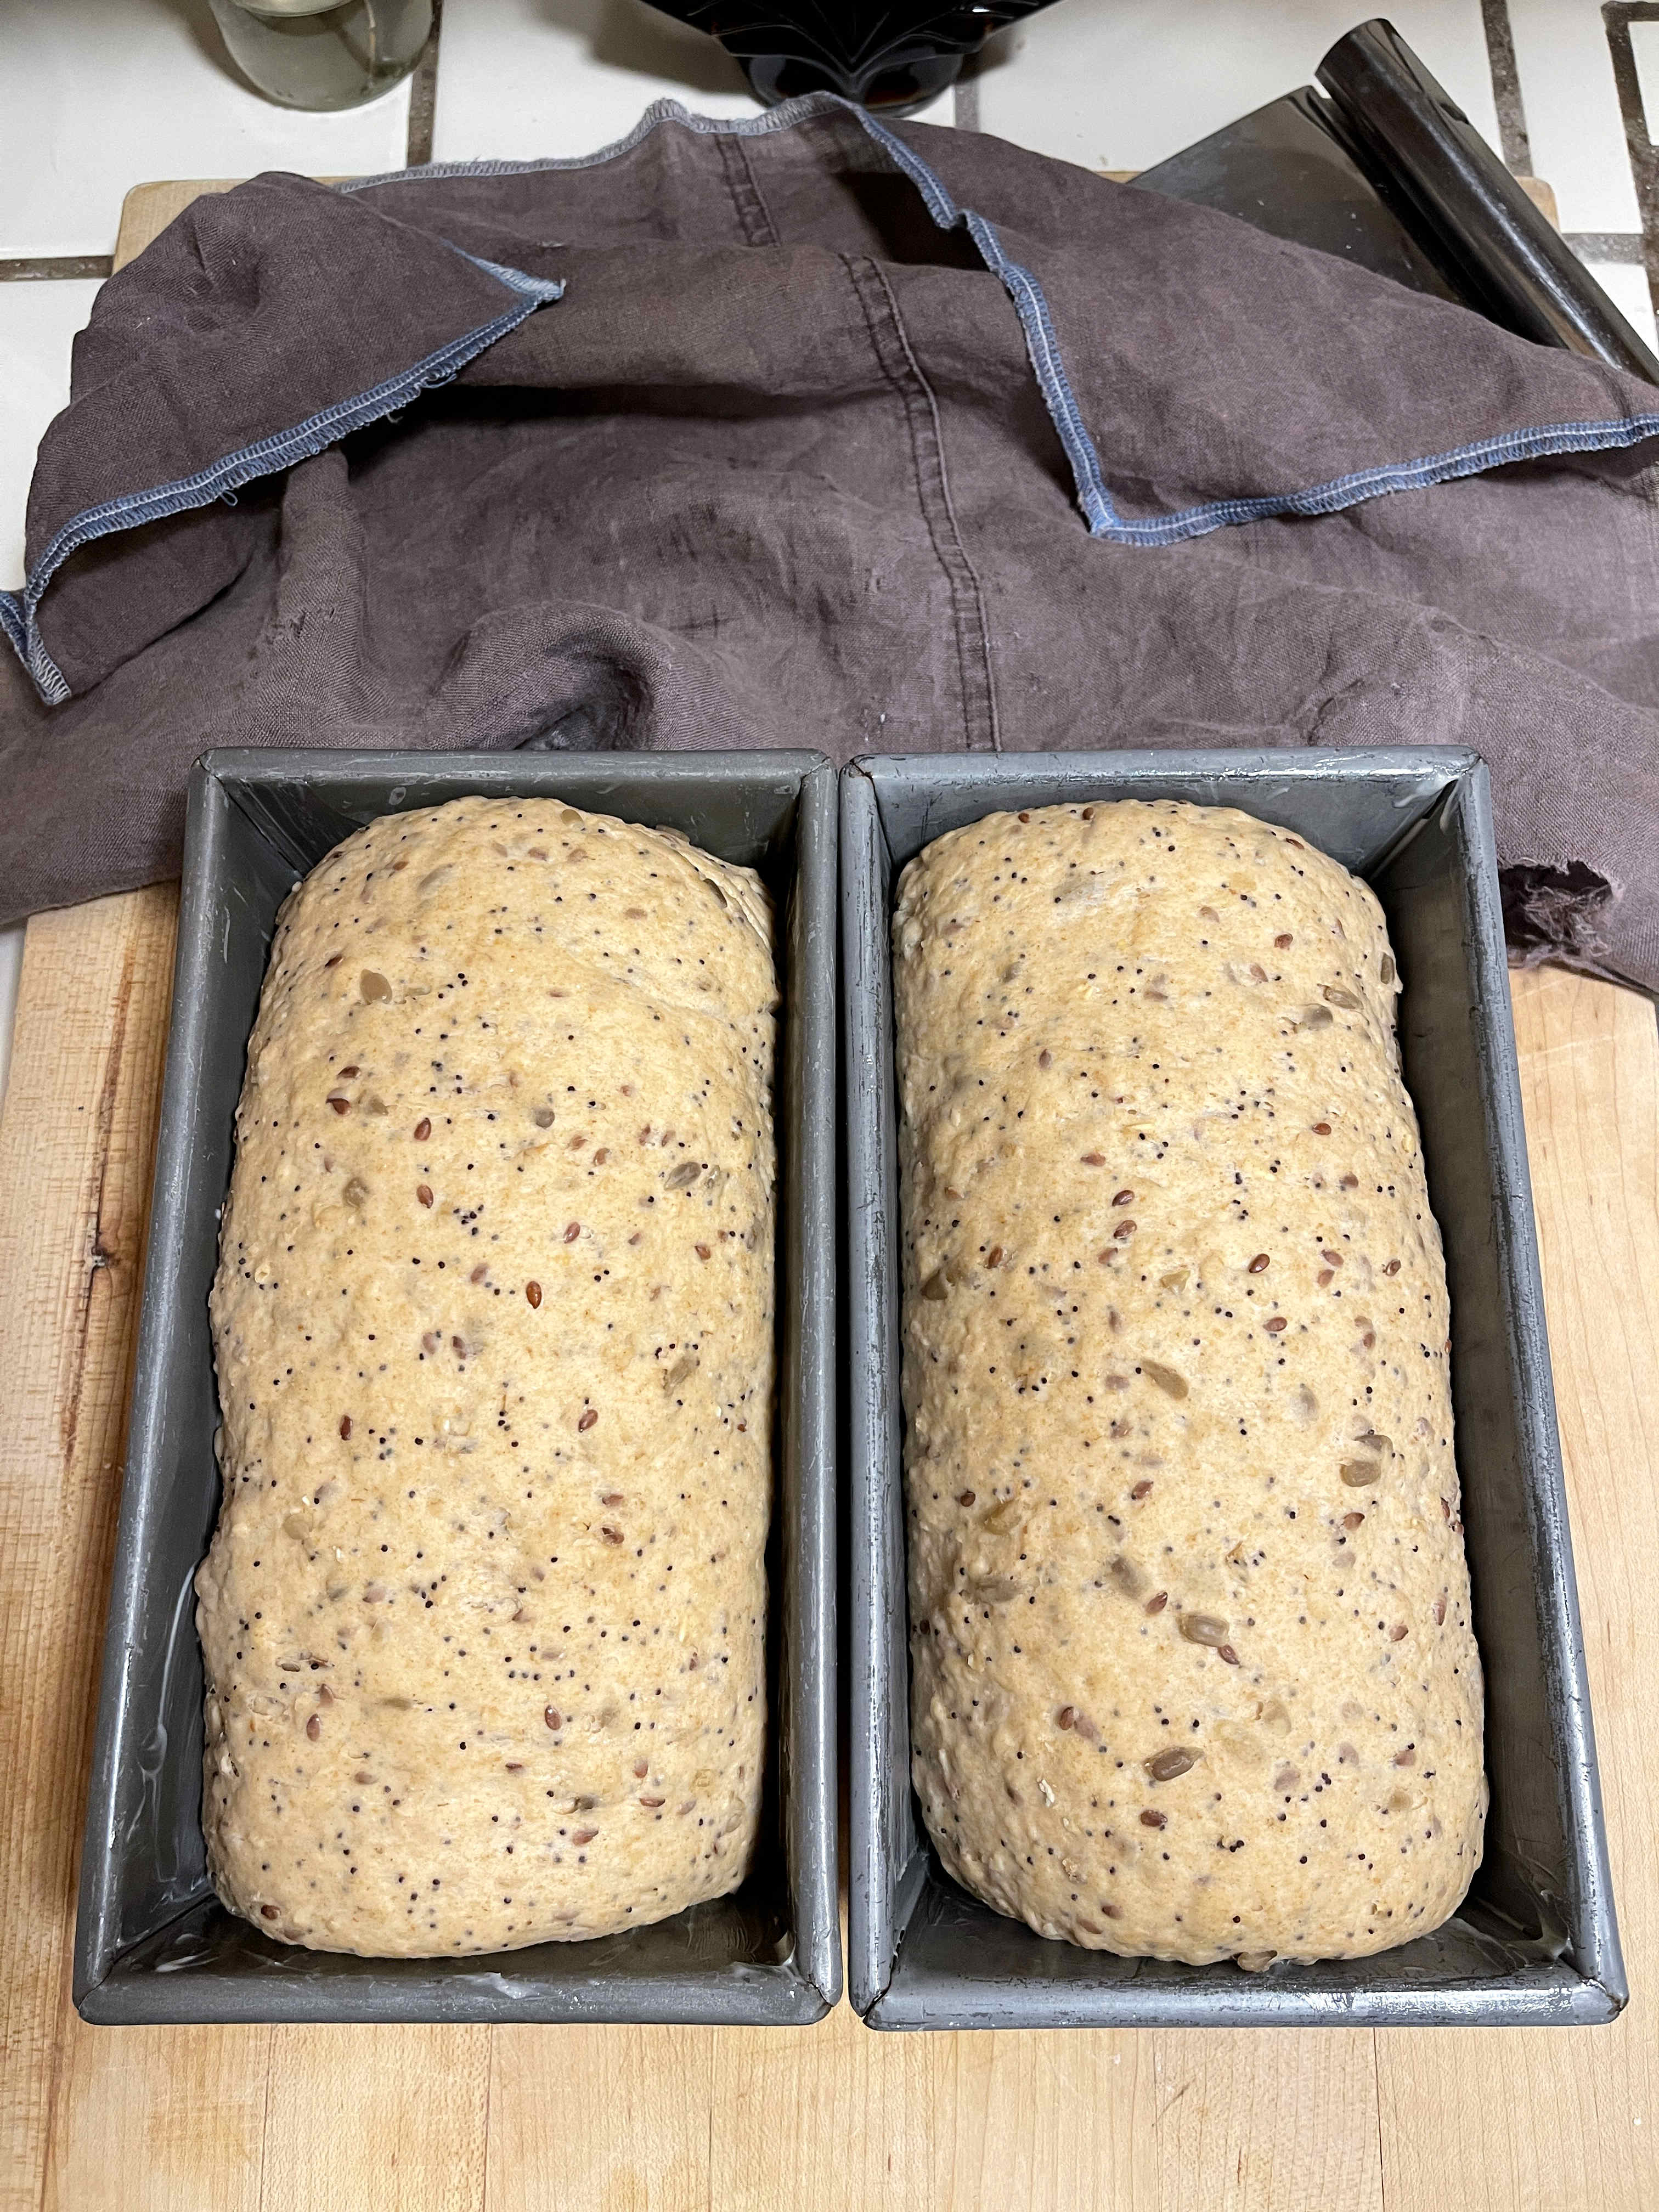 formed loaves of multigrain sourdough discard bread in loaf pans ready have proofed and are ready for baking